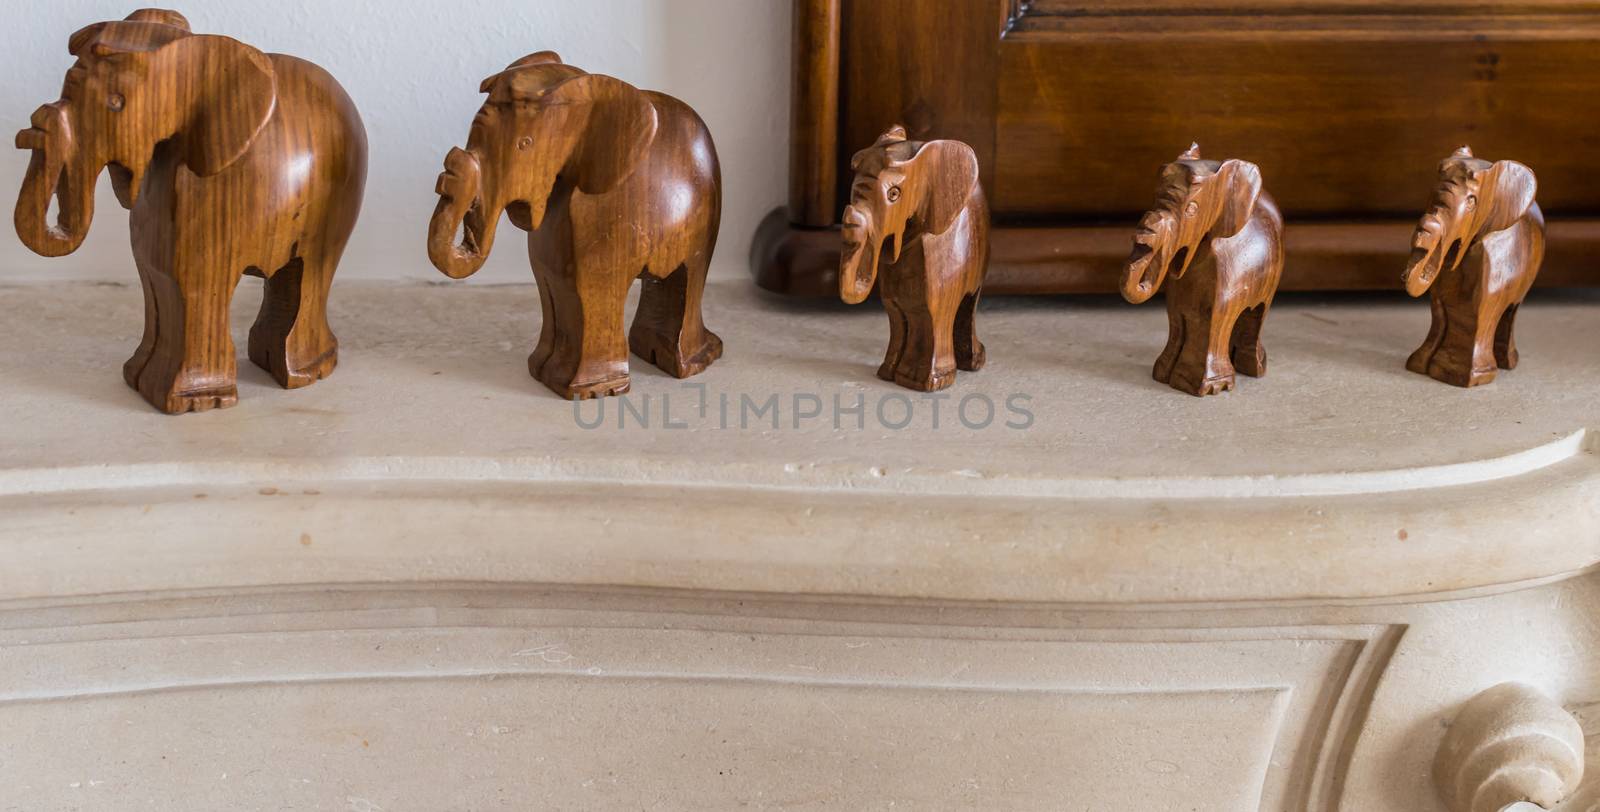 Carved wooden elephants on a marble pedestal in the room